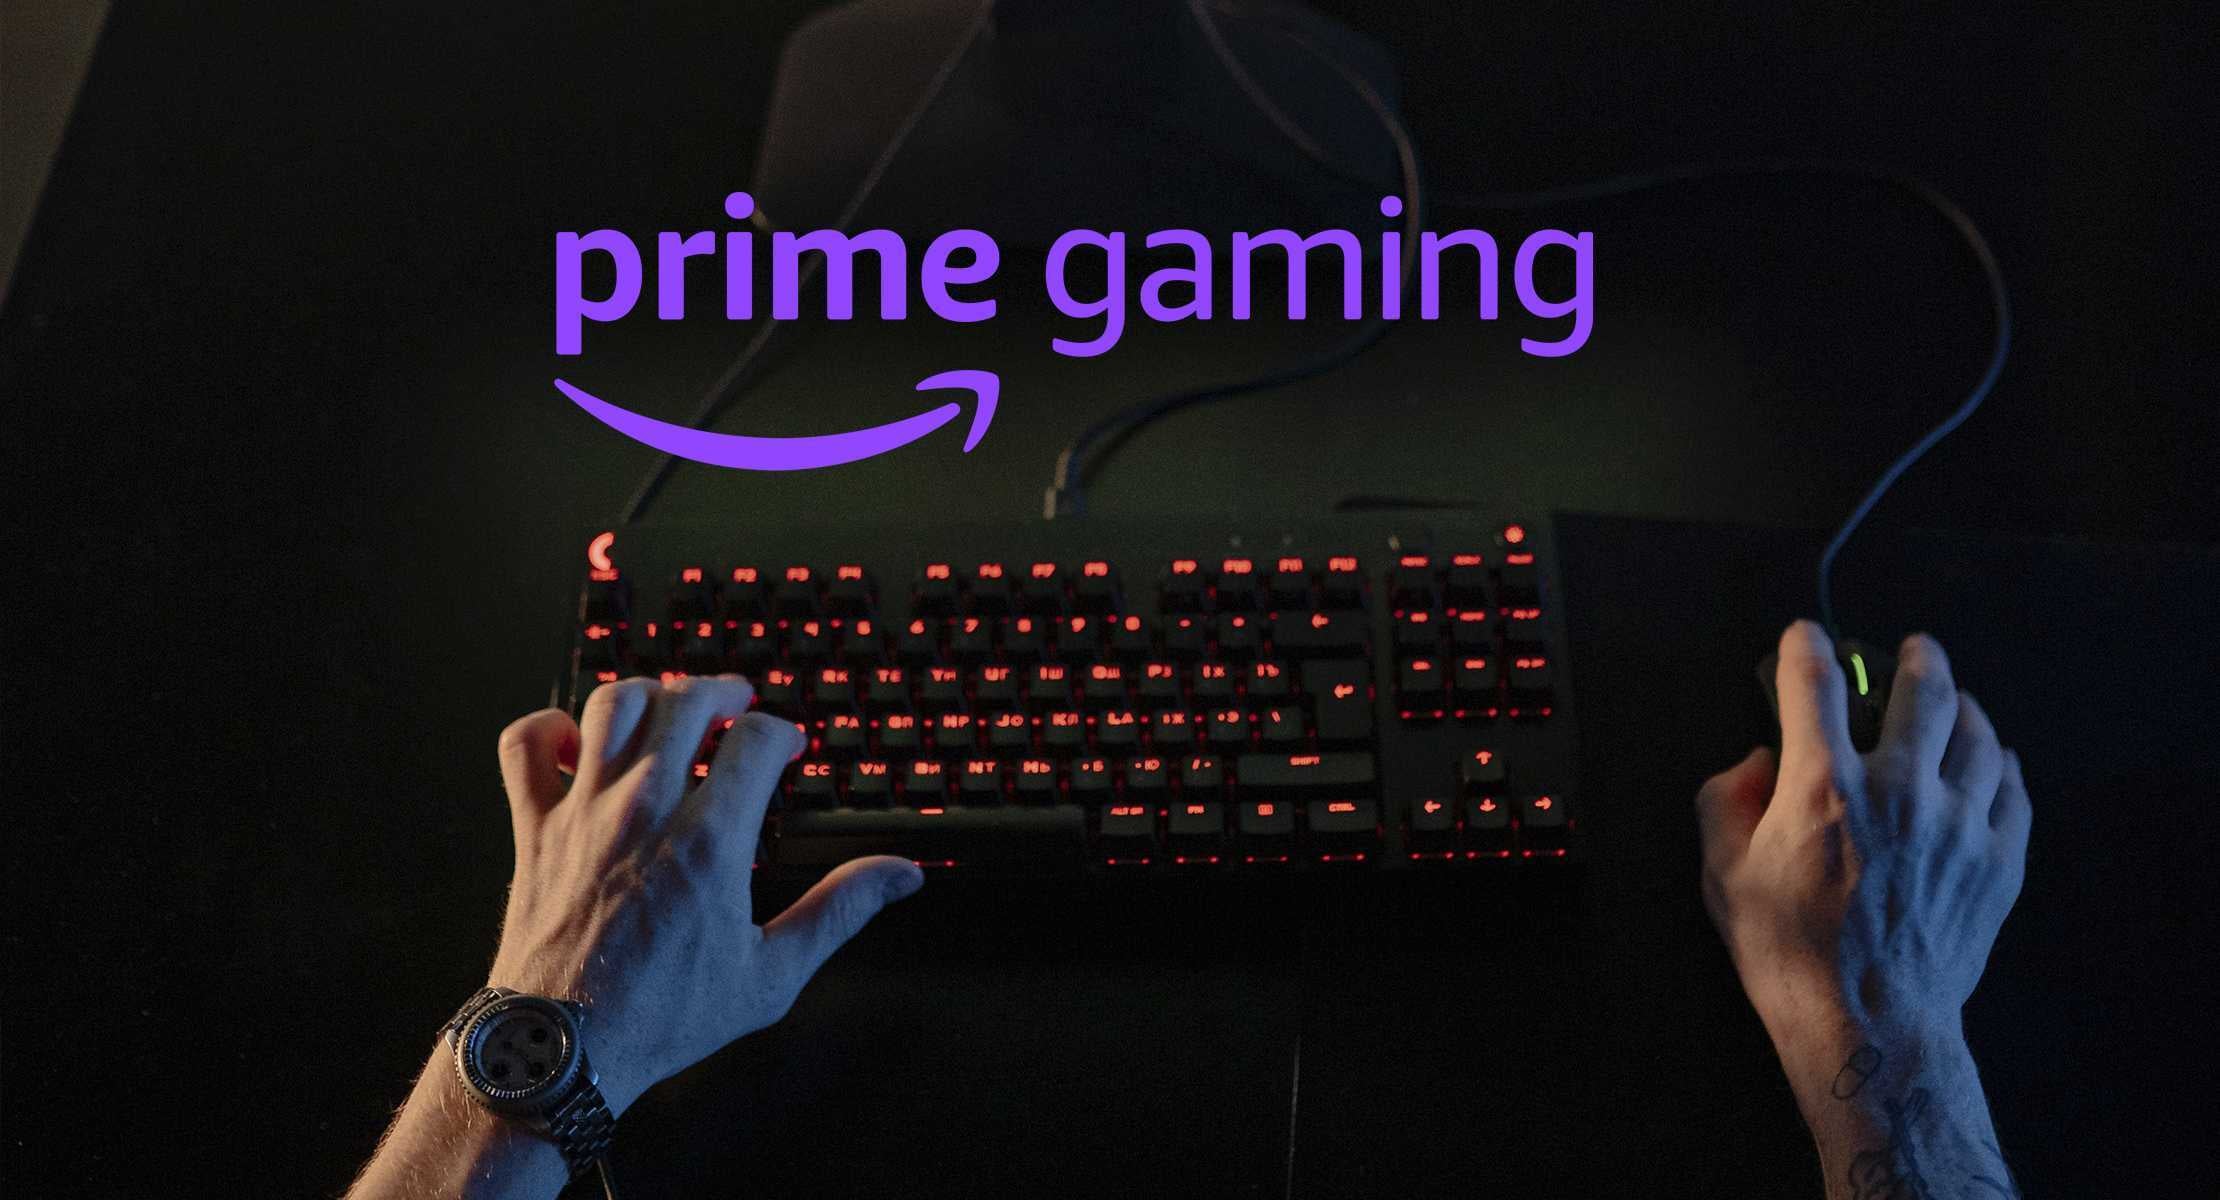 Unlock your monthly in-game content with your Prime membership!